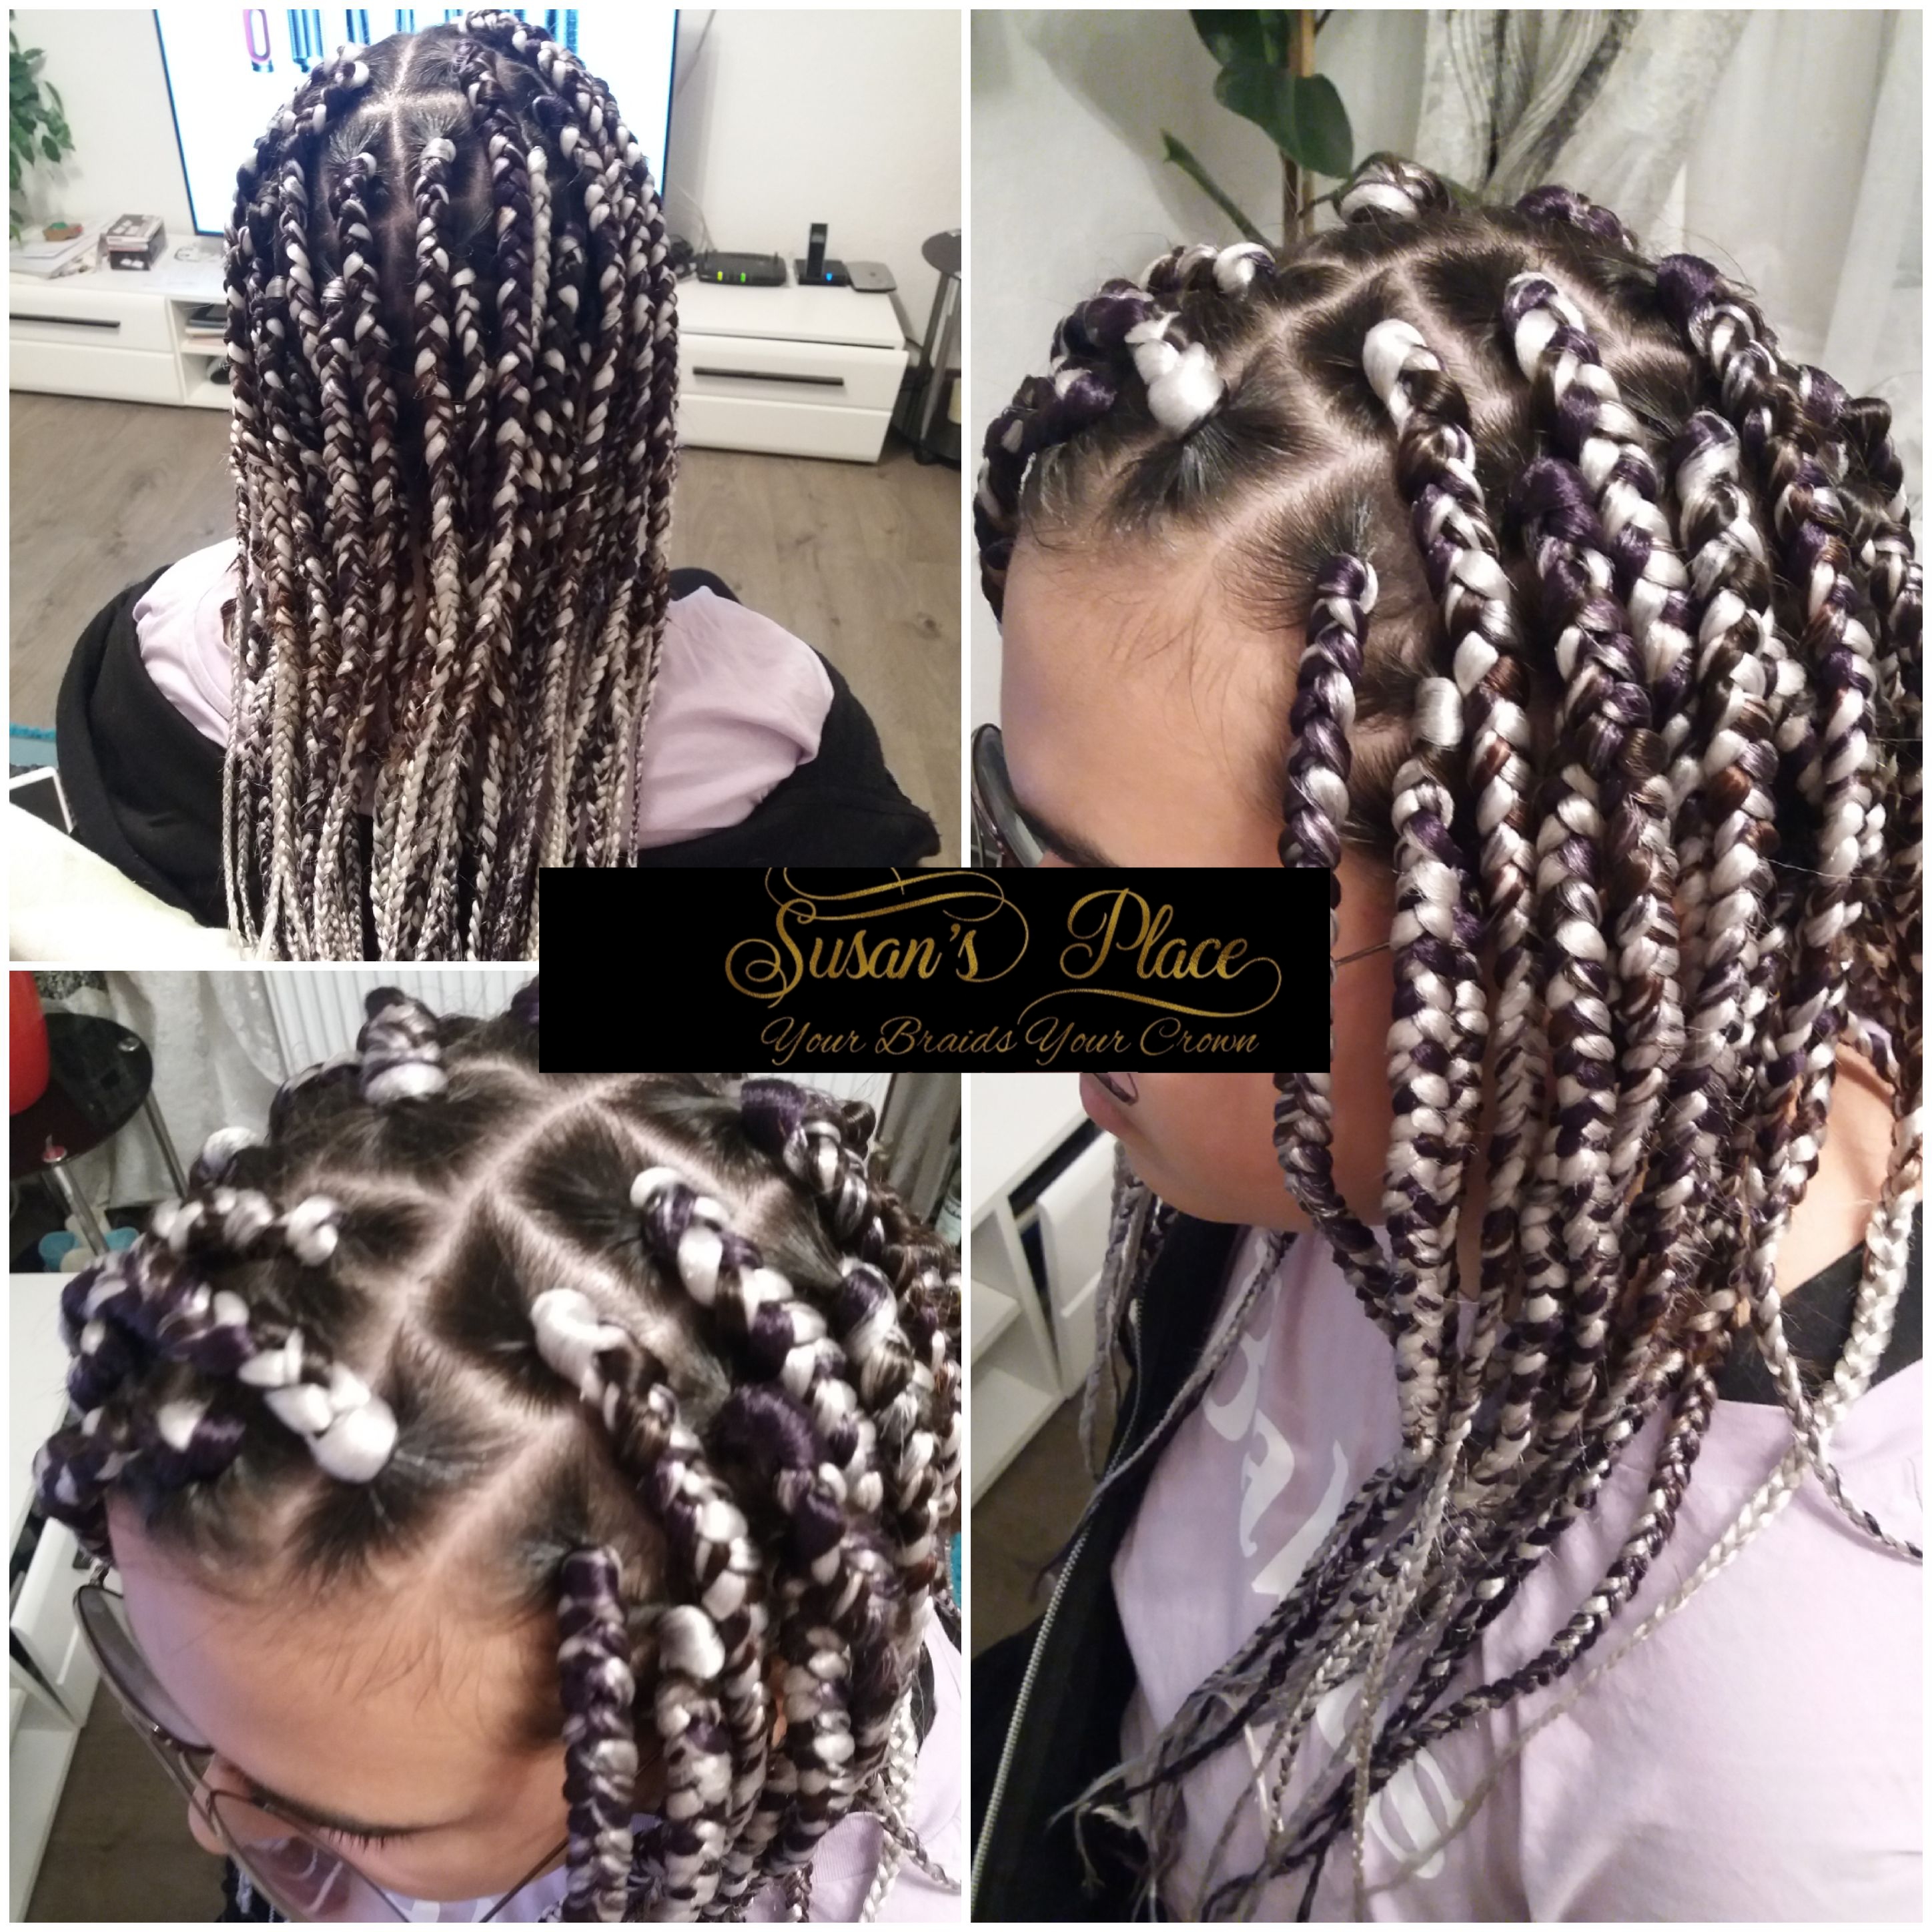 Single braids - Your satisfaction is our concern | Susan's Place